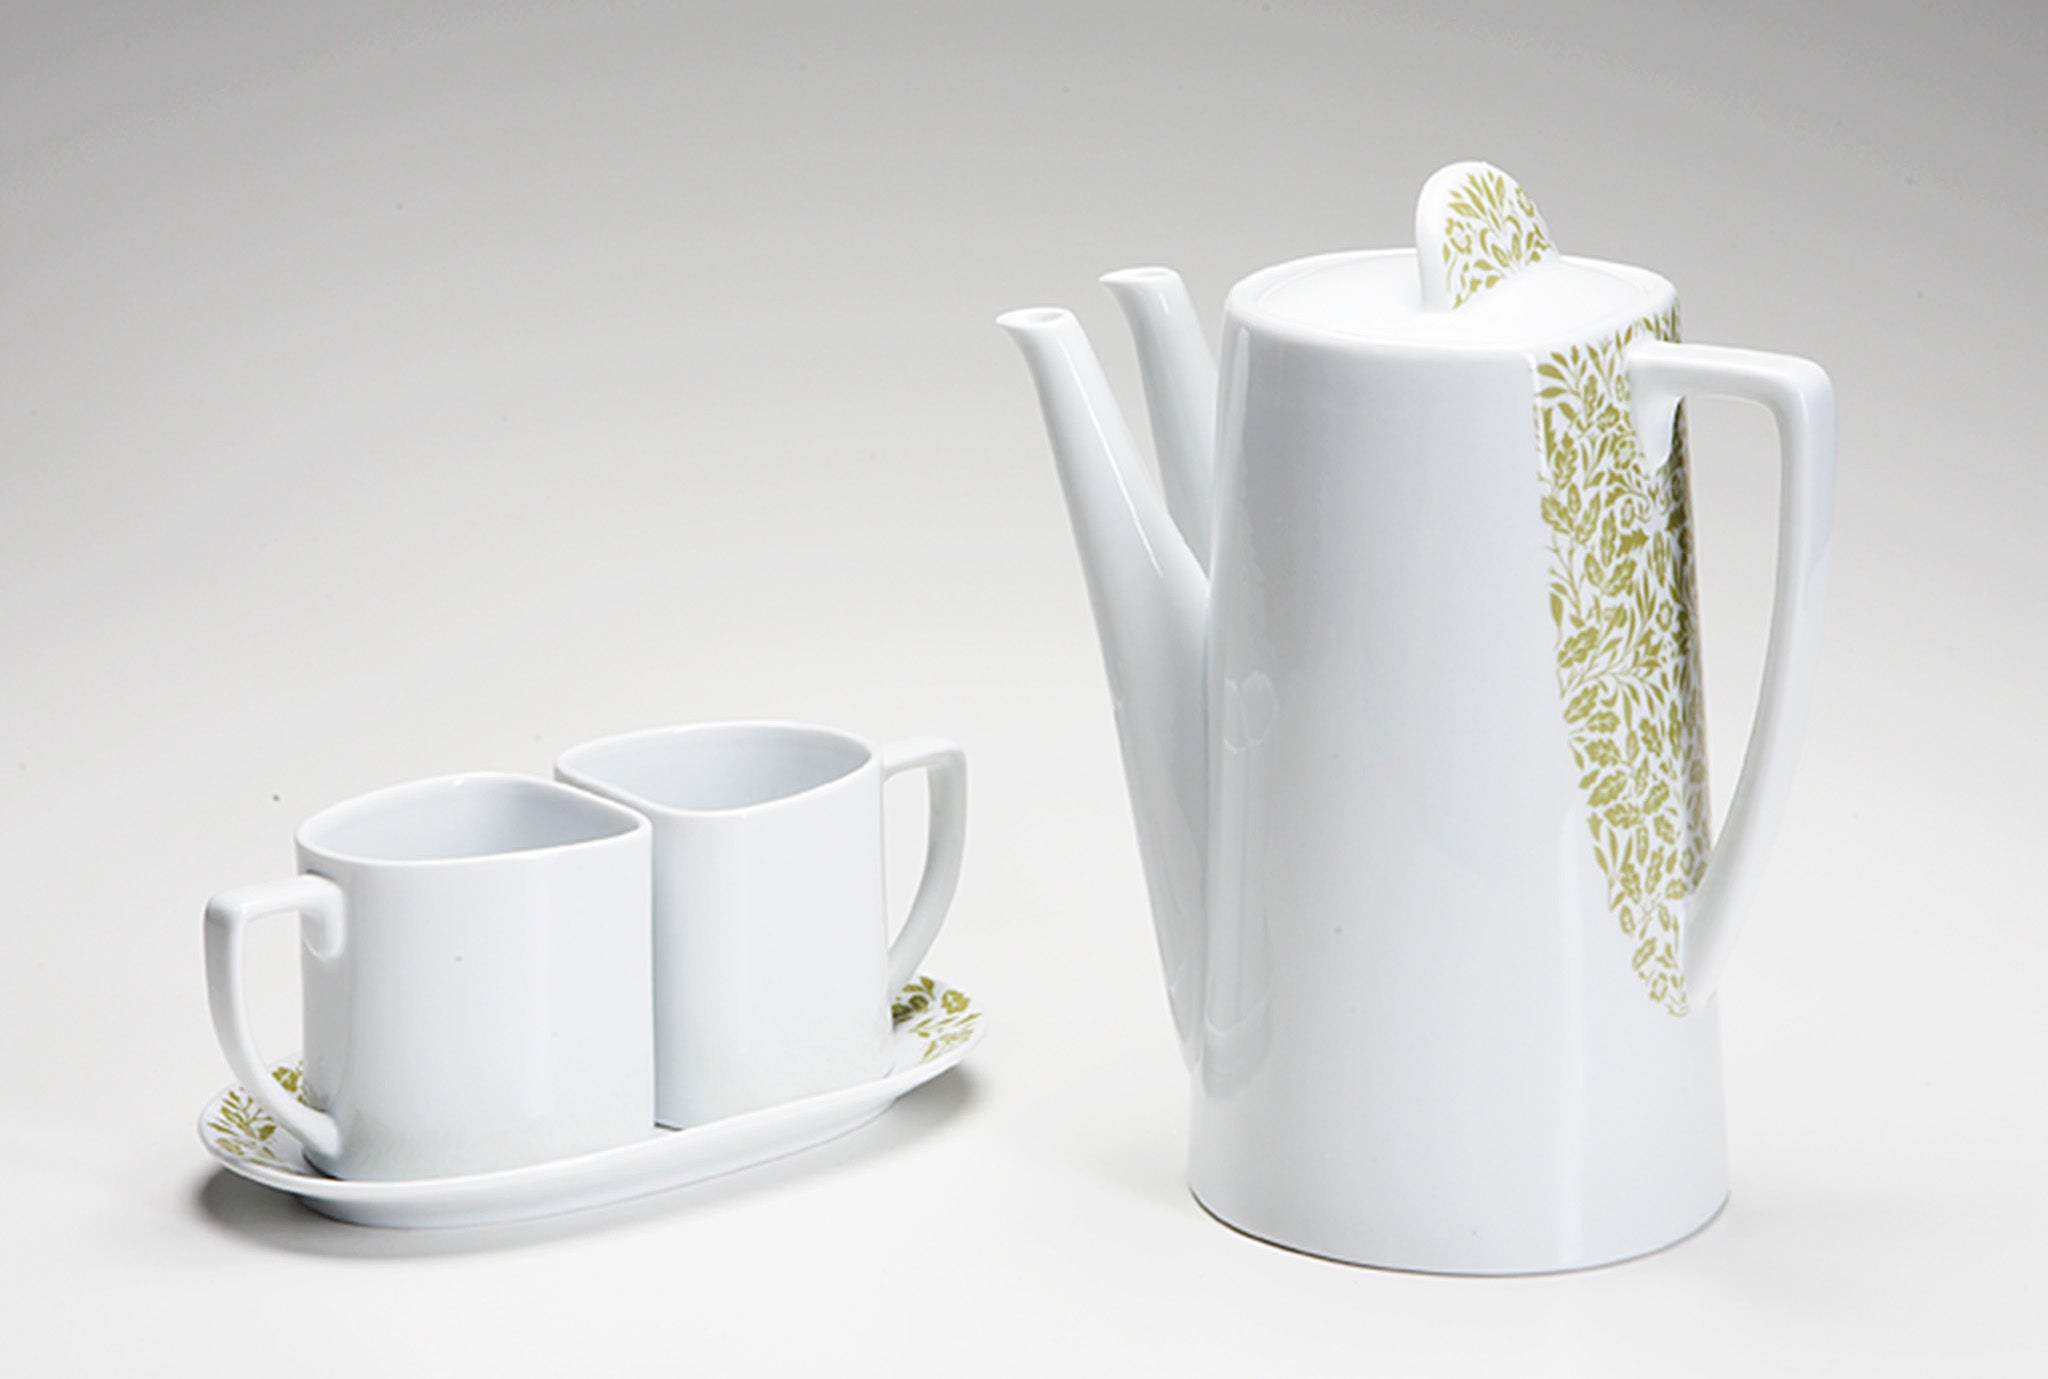 Marla Dawn Home's Tea for Two in Acorn and Leaf